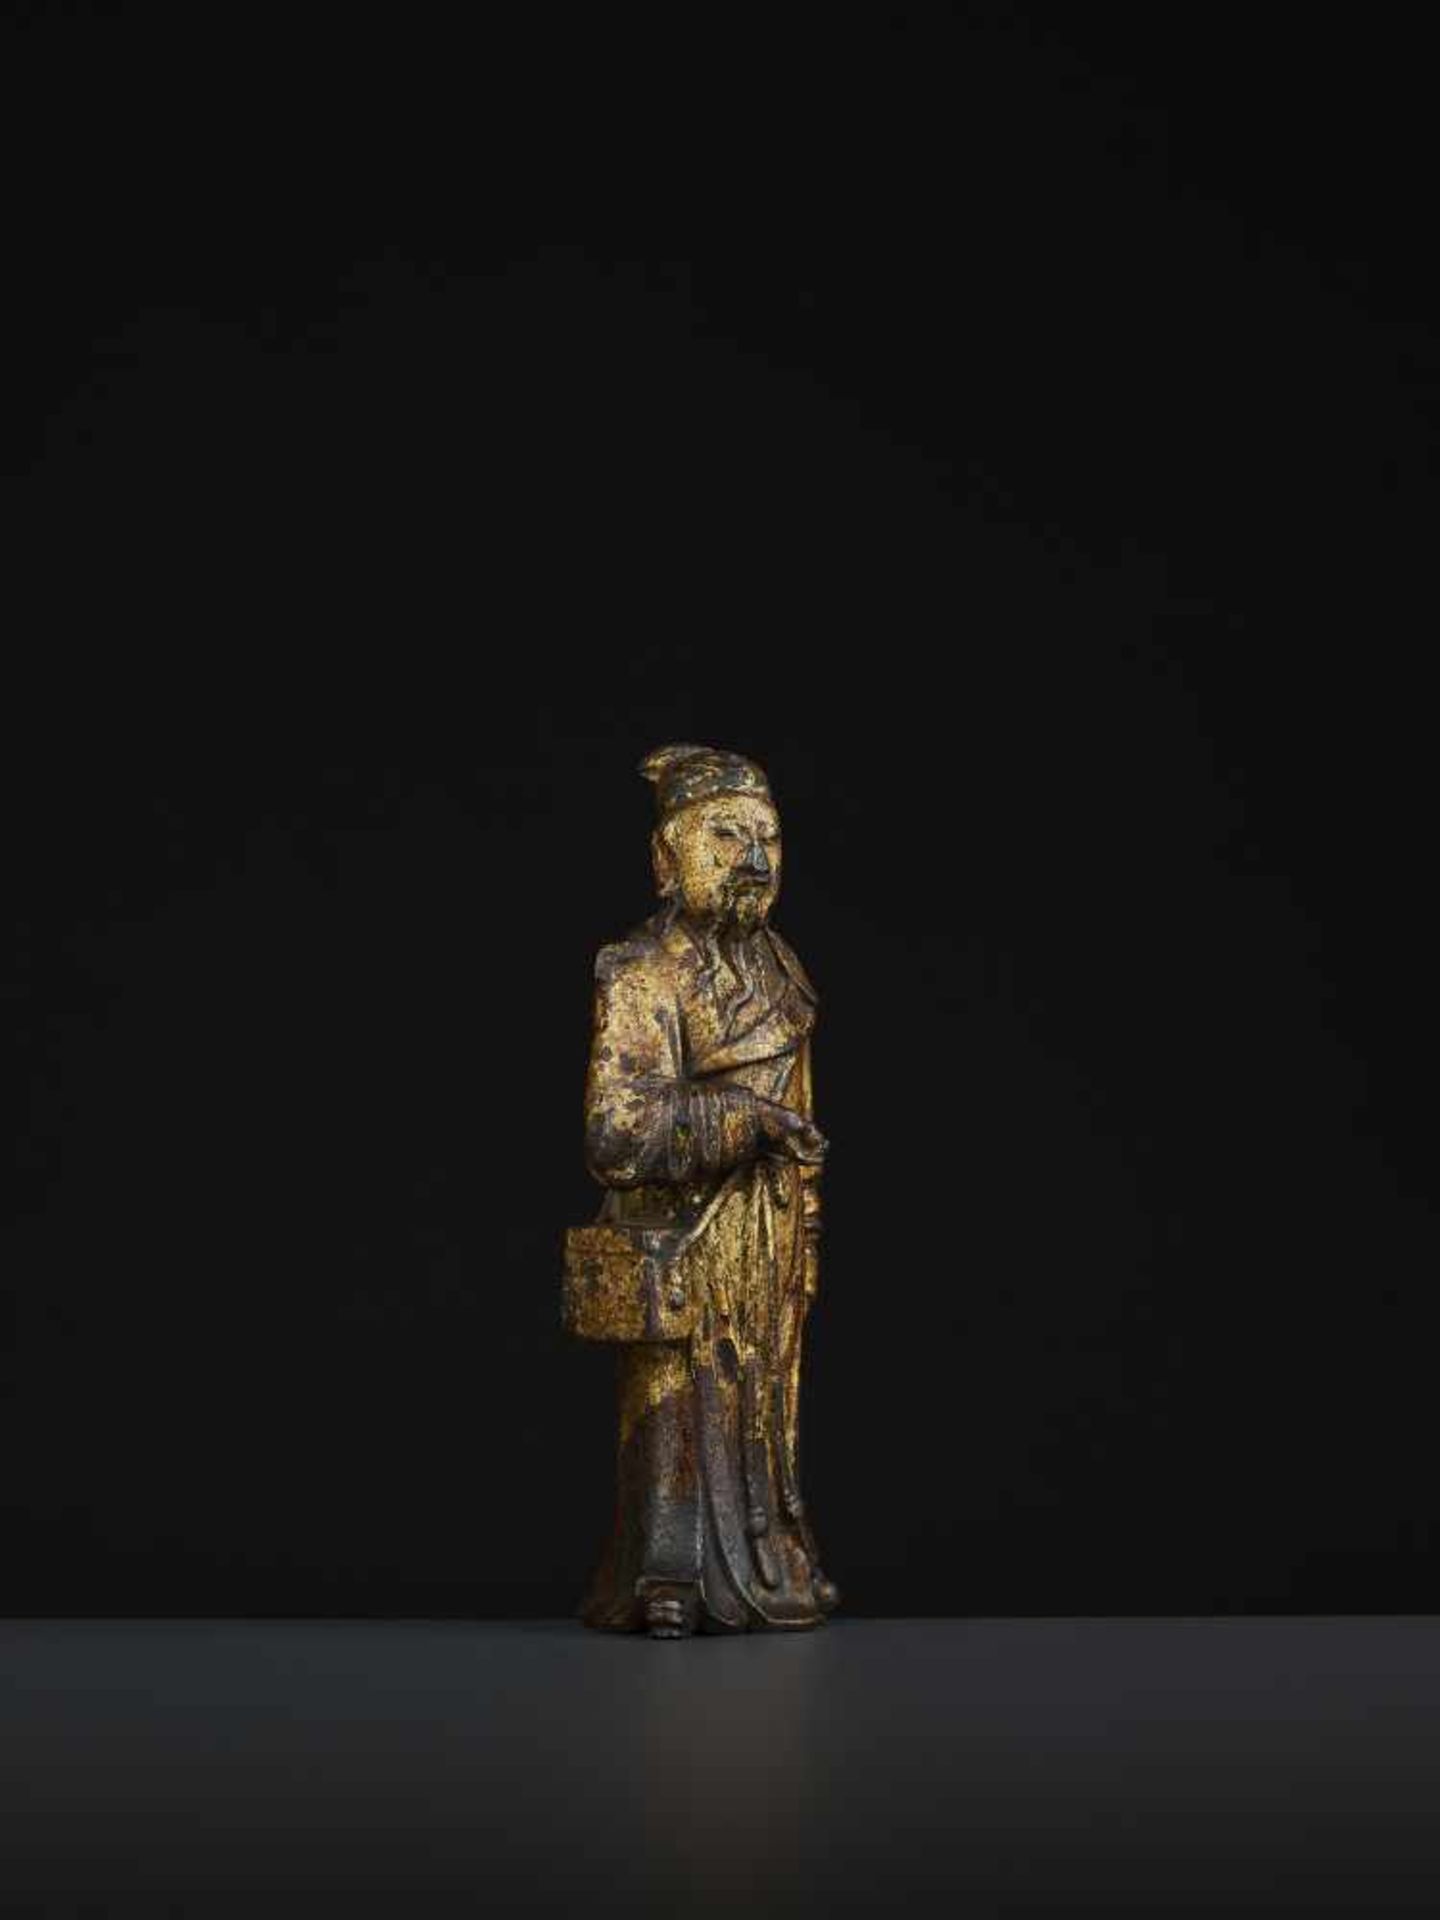 A MING DAOIST IMMORTAL BRONZEChina 16th - 17th century. The bronze with a rich gold lacquer coating. - Image 7 of 10